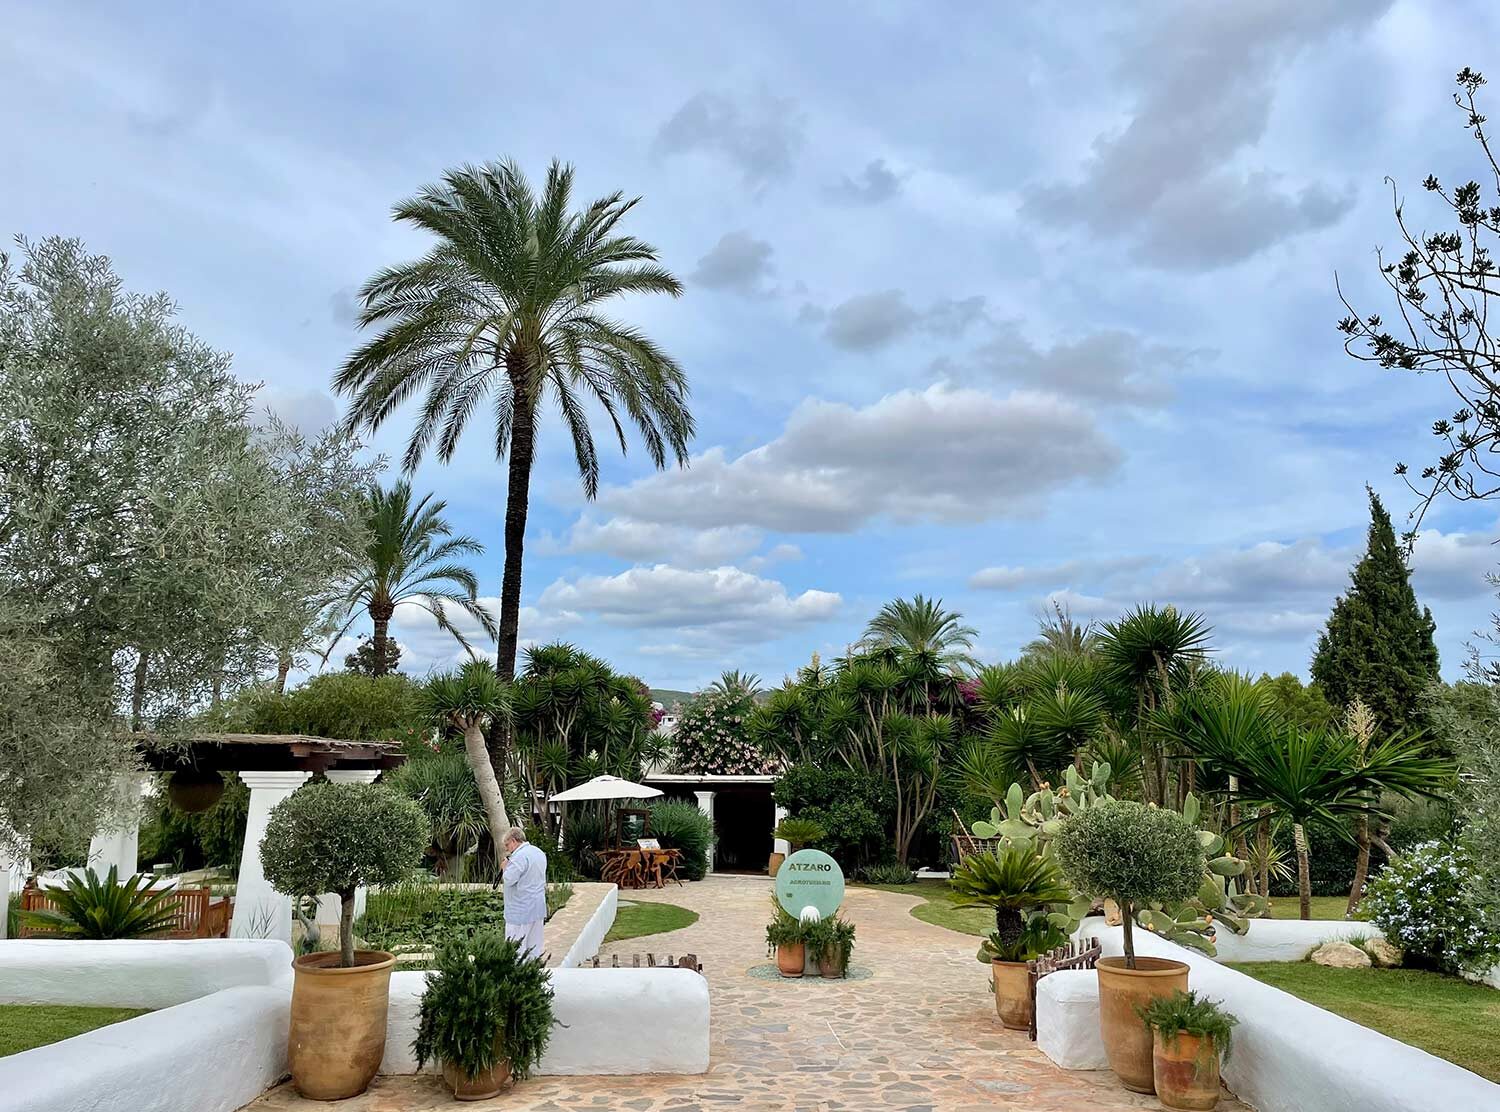 Atzaró Agroturismo Hotel Immersed in nature, but close to all the best things in Ibiza